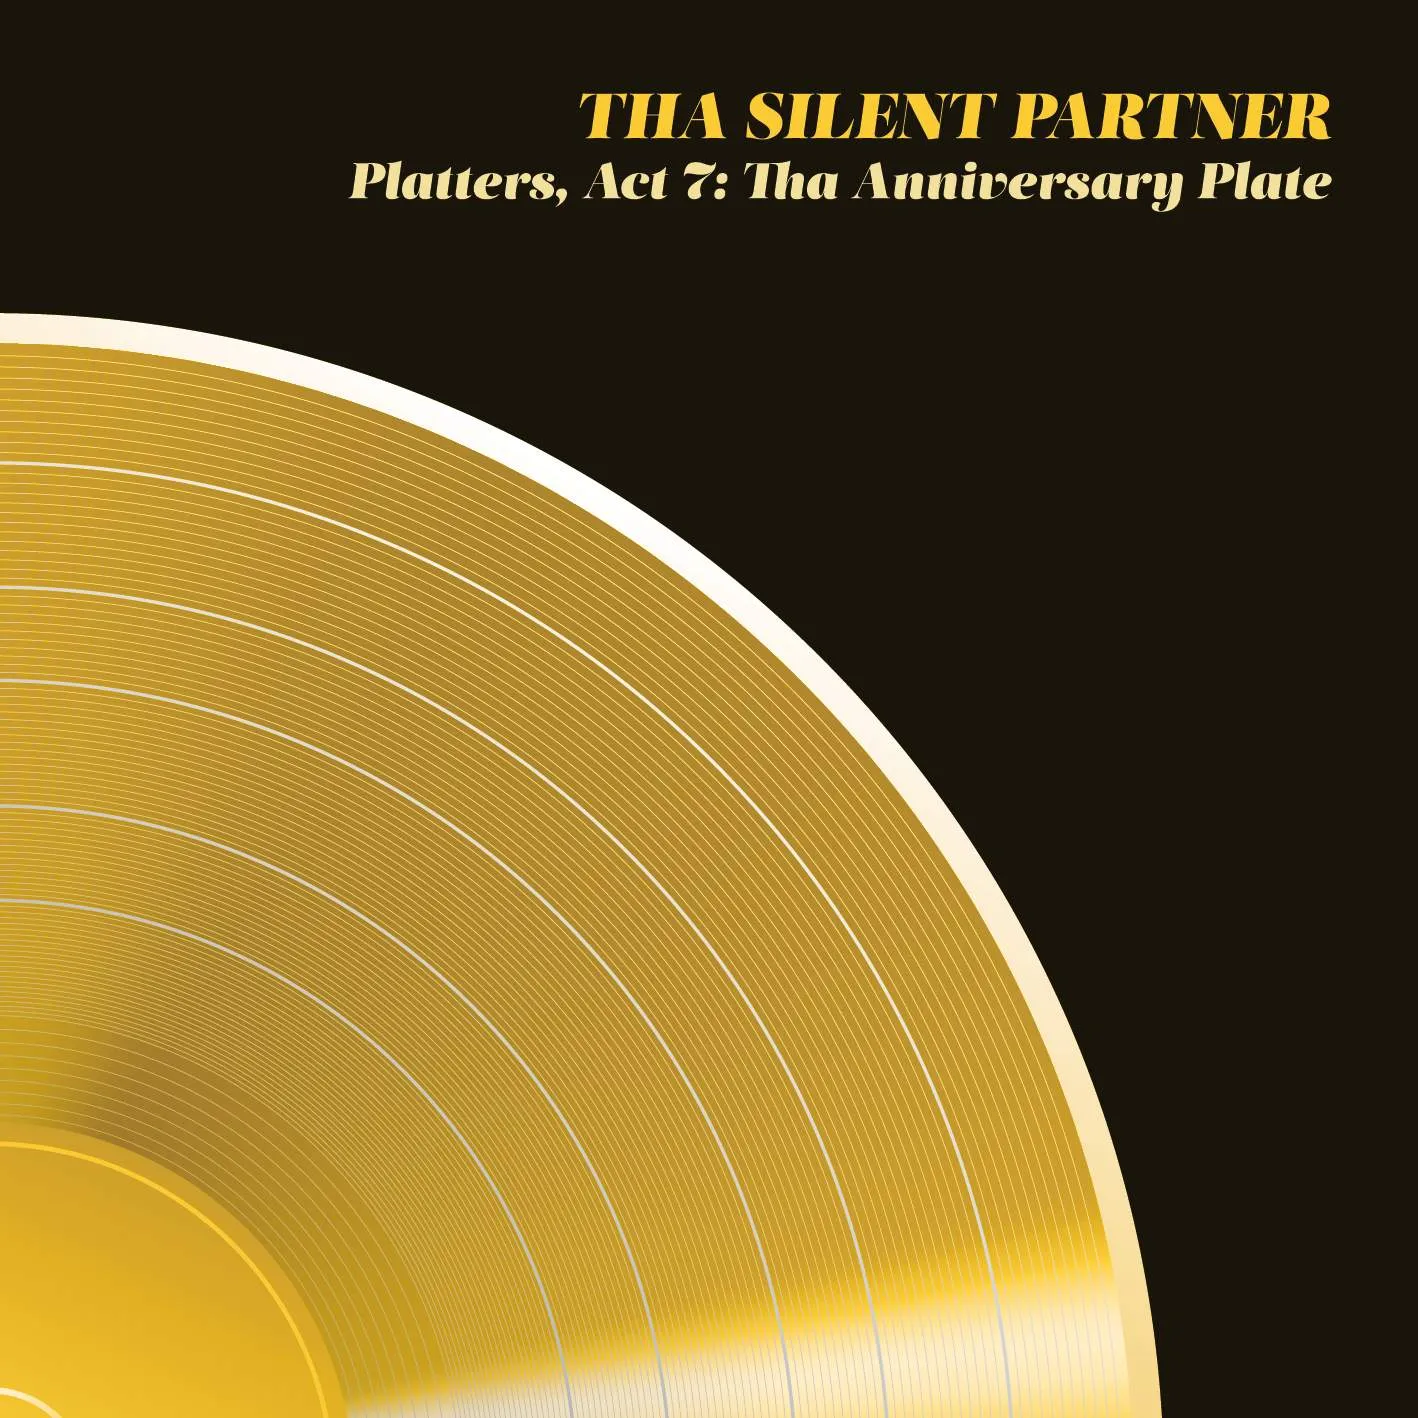 Album cover for “Platters, Act 7: Tha Anniversary Plate” by Tha Silent Partner